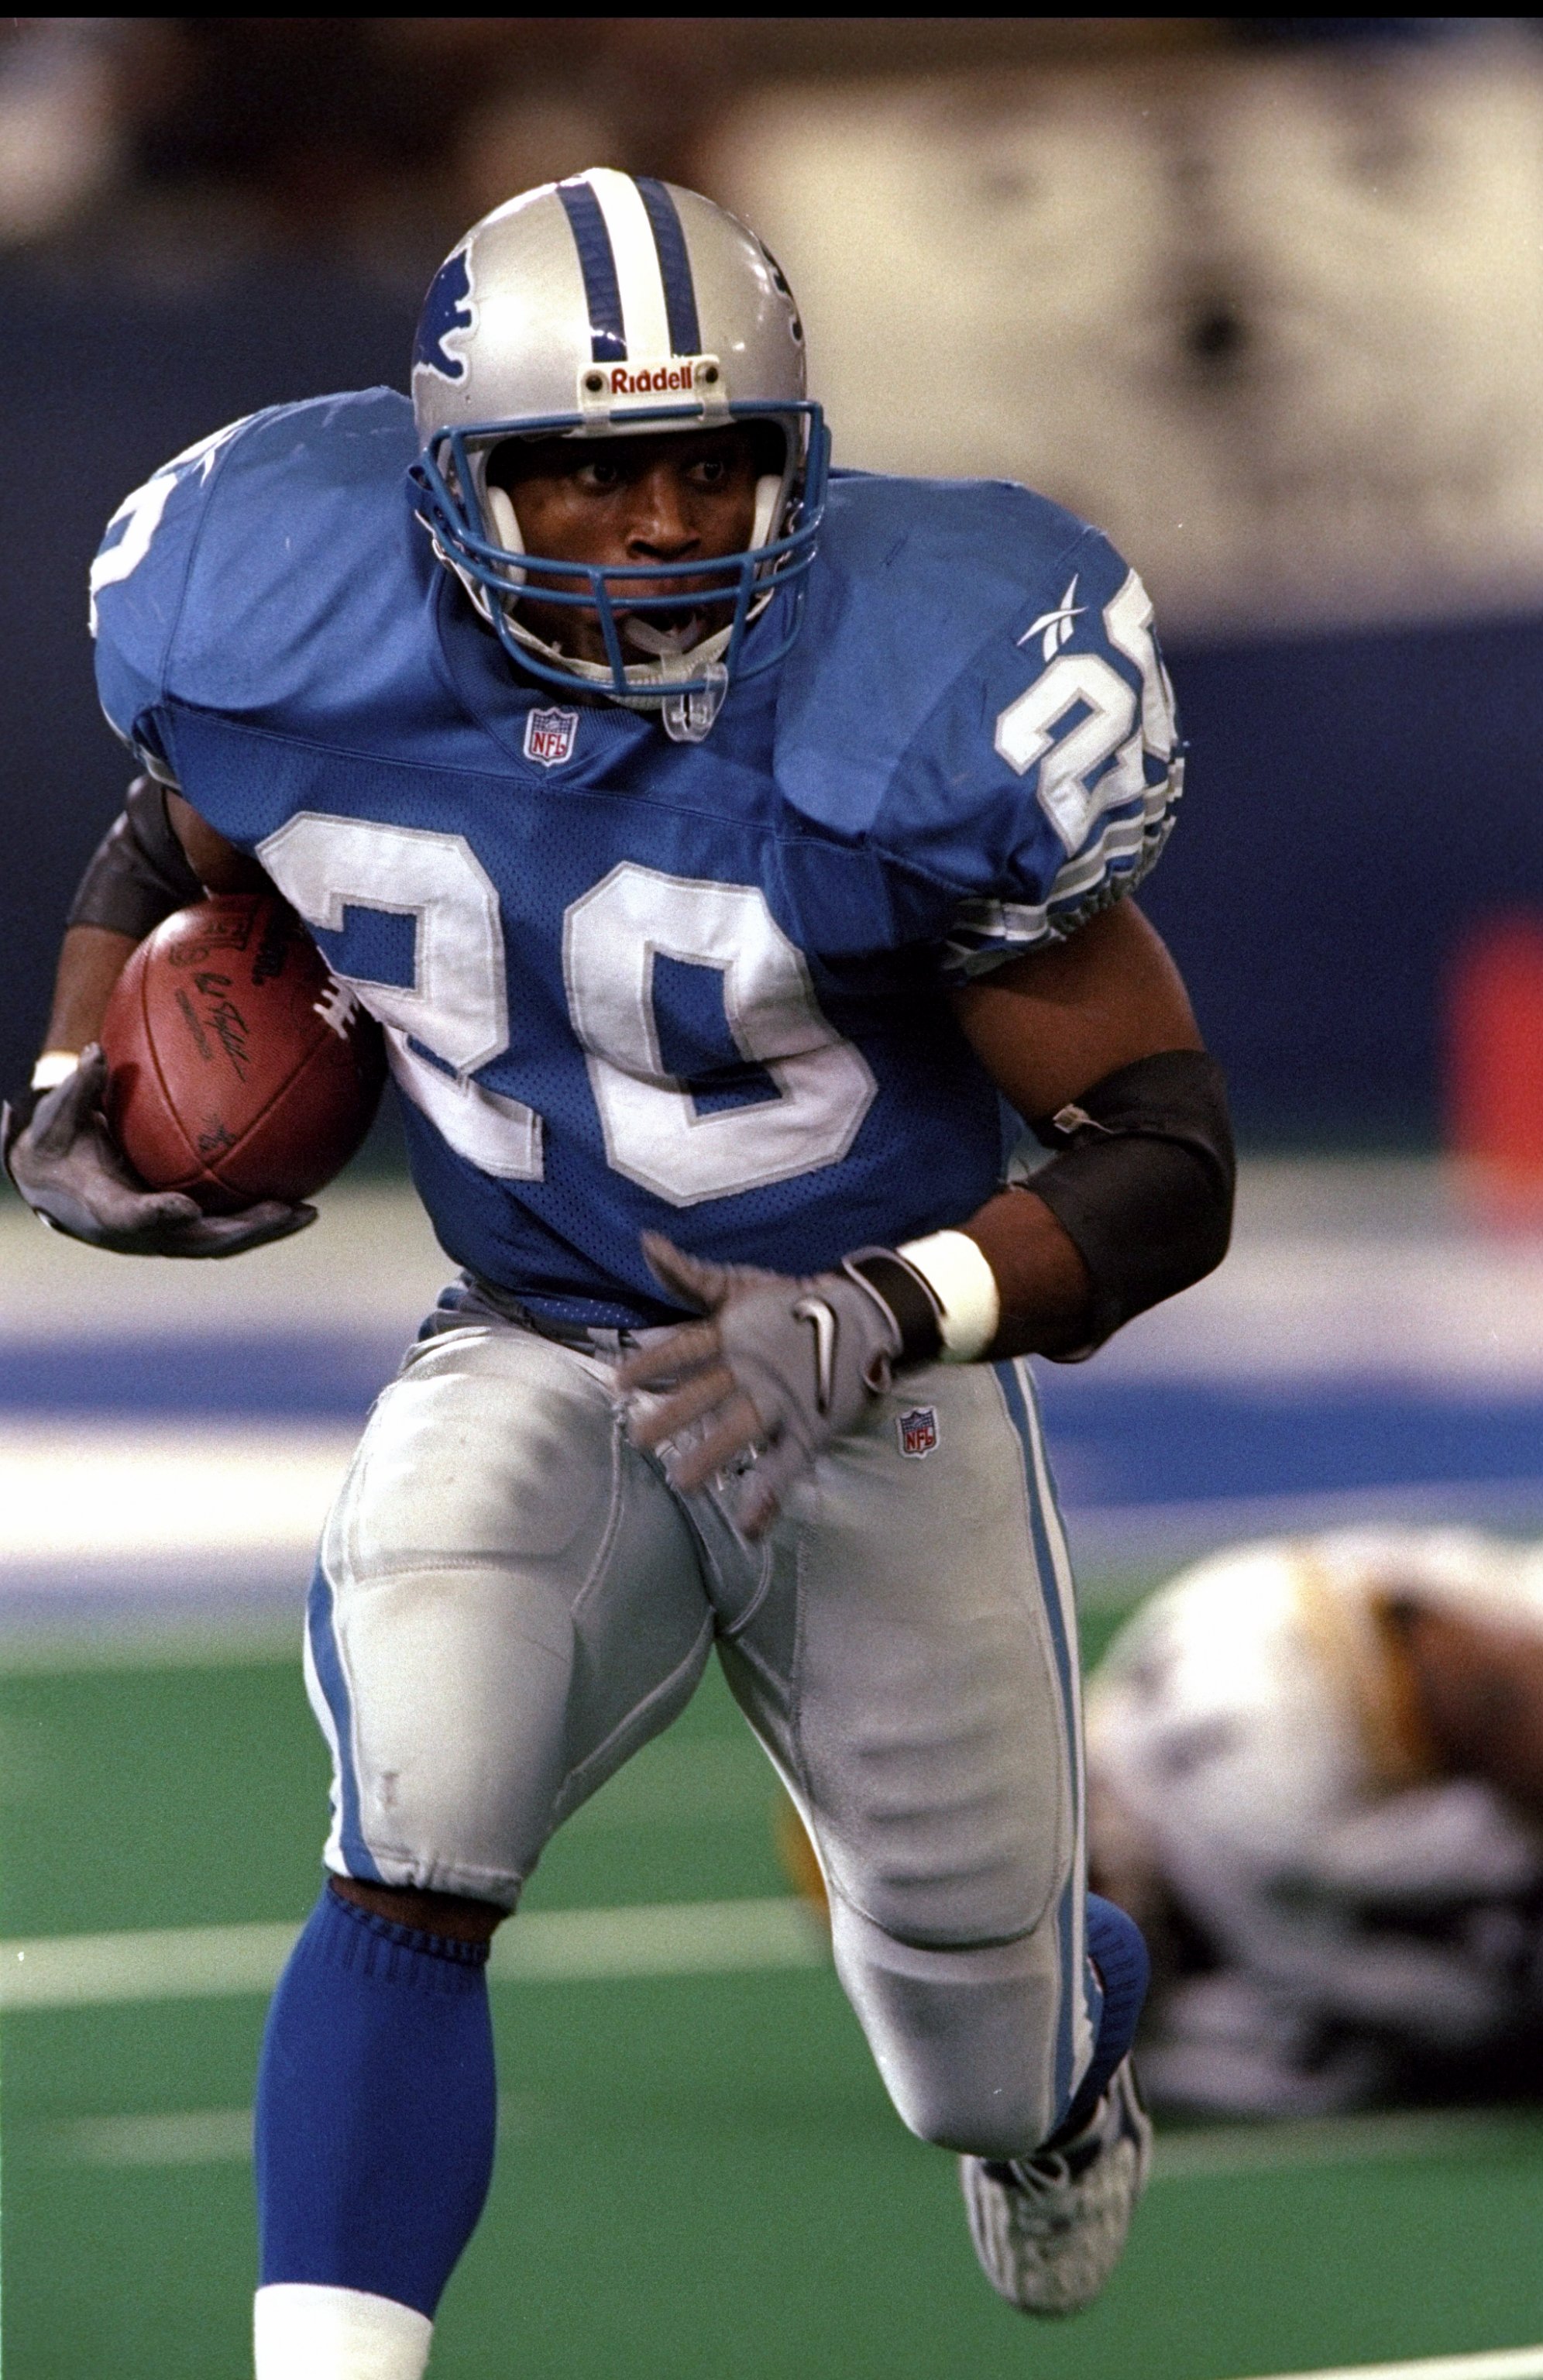 26 Nov 1998: Running back Barry Sanders #20 of the Detroit Lions in action during the game against the Pittsburgh Steelers at the Pontiac Silverdome in Pontiac, Michigan. The Lions defeated the Steelers 19-16.